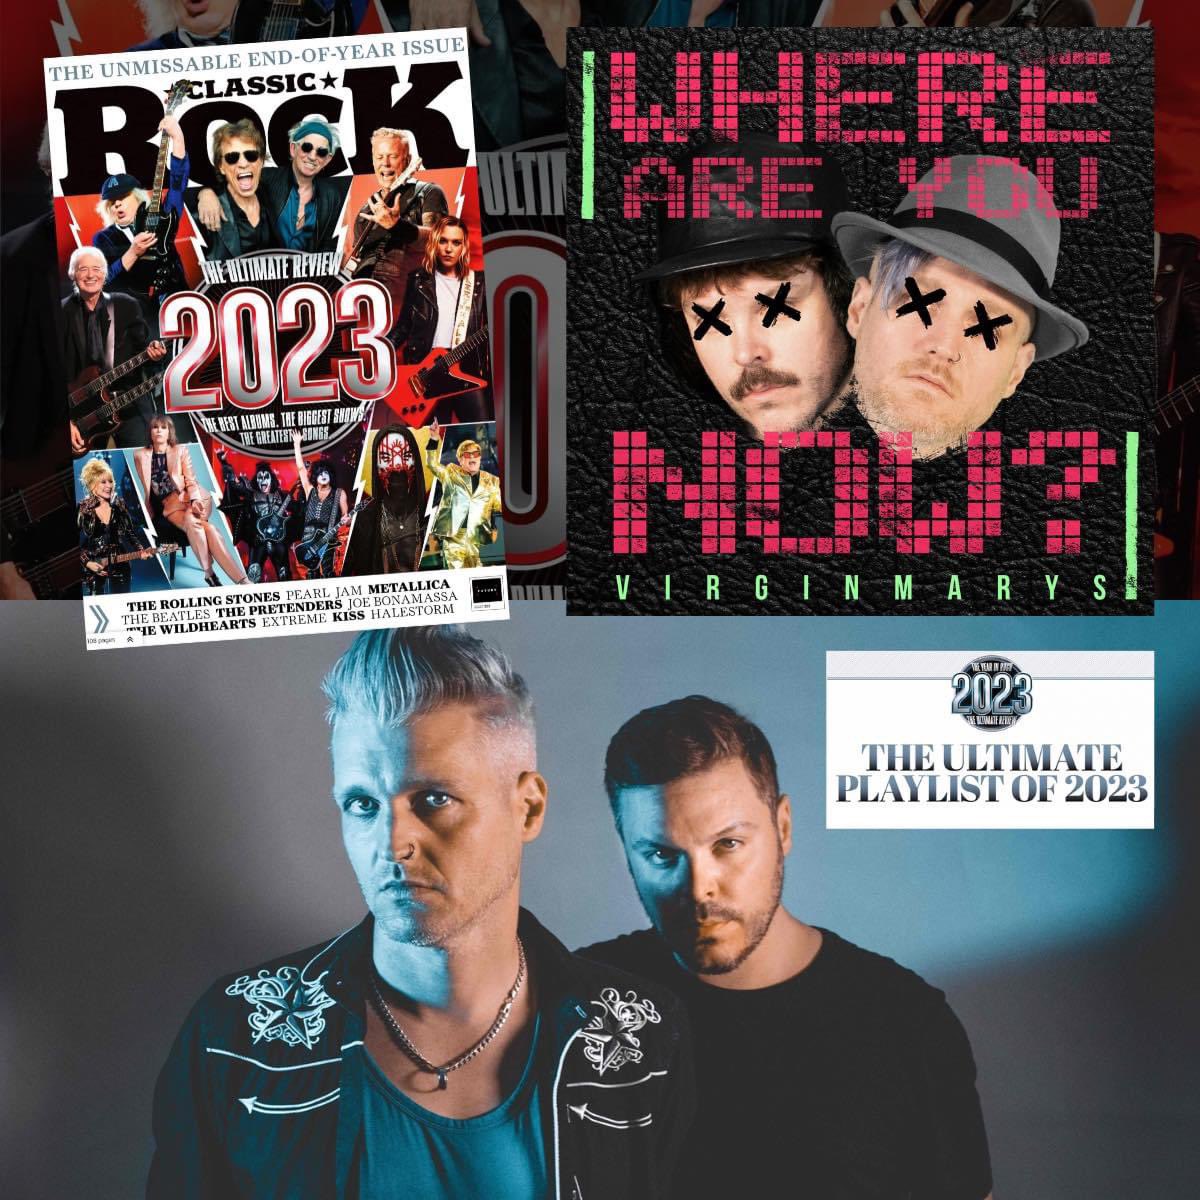 MASSIVE thanks to @ClassicRockMag for including our single ‘Where are you now?’ In their ULTIMATE PLAYLIST OF 2023!⚡️⚡️⚡️⚡️⚡️ Listed alongside Dolly Parton, Rolling Stones & Metallica…..pretty good end to the year I’d say!!!!!🔥🔥🔥 #peacelovetruthmusic